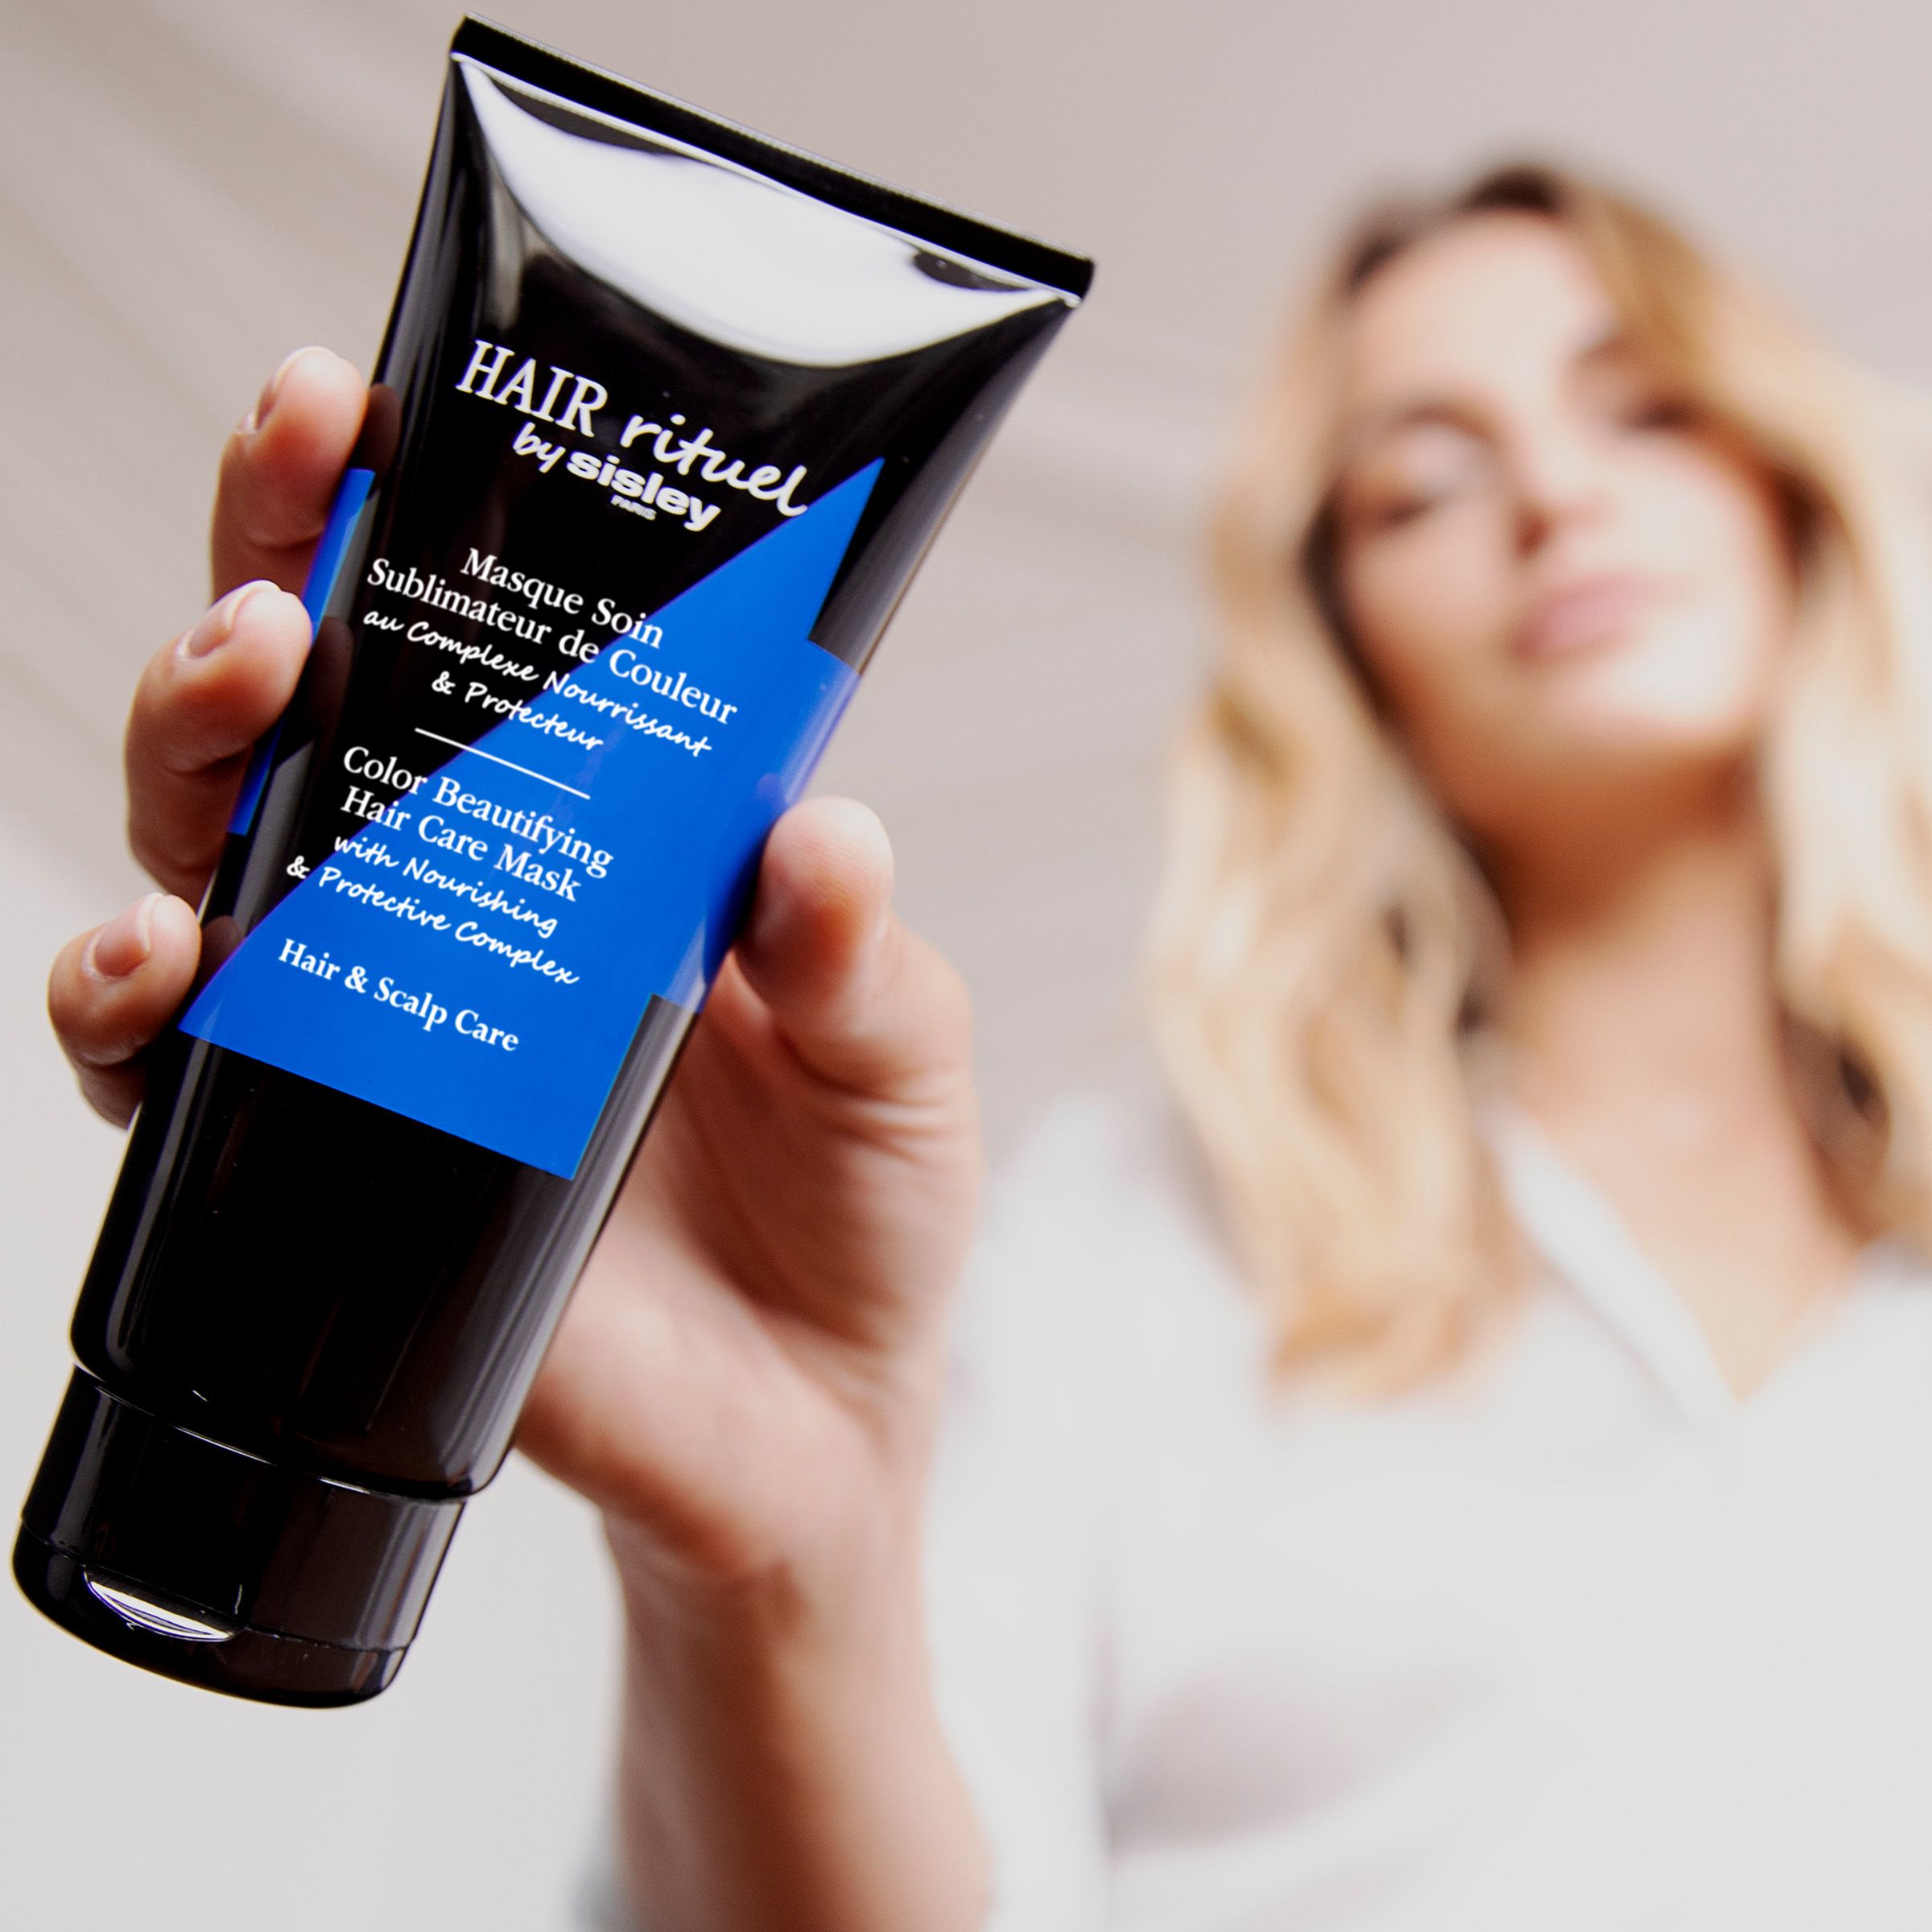 Colour Beautifying Hair Care Mask. Discover Sisley's new colour protect mask designed for colour to last twice as long in just 3 minutes!